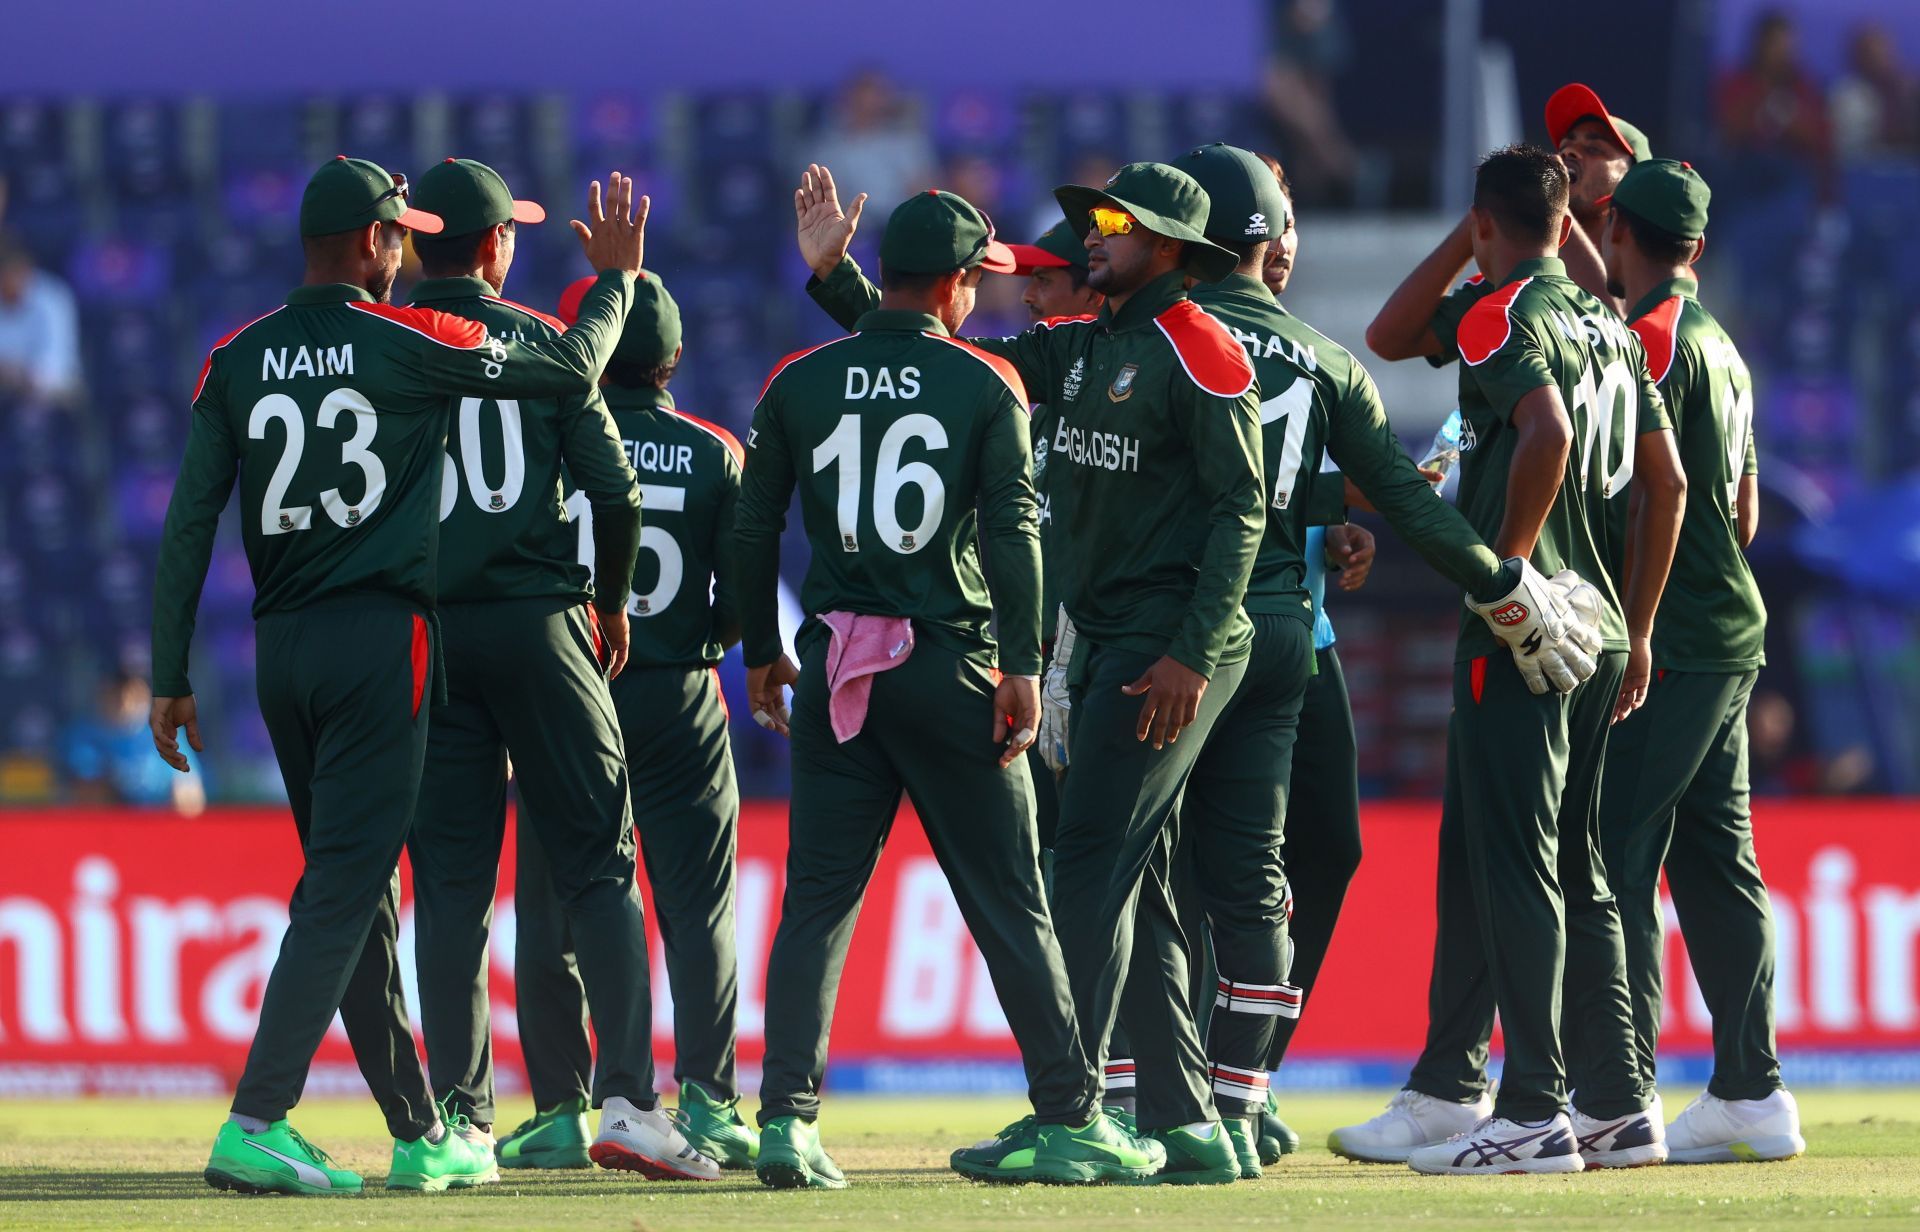 Can Bangladesh record their first win in the Super 12 stage of the ICC T20 World Cup 2021 tomorrow?